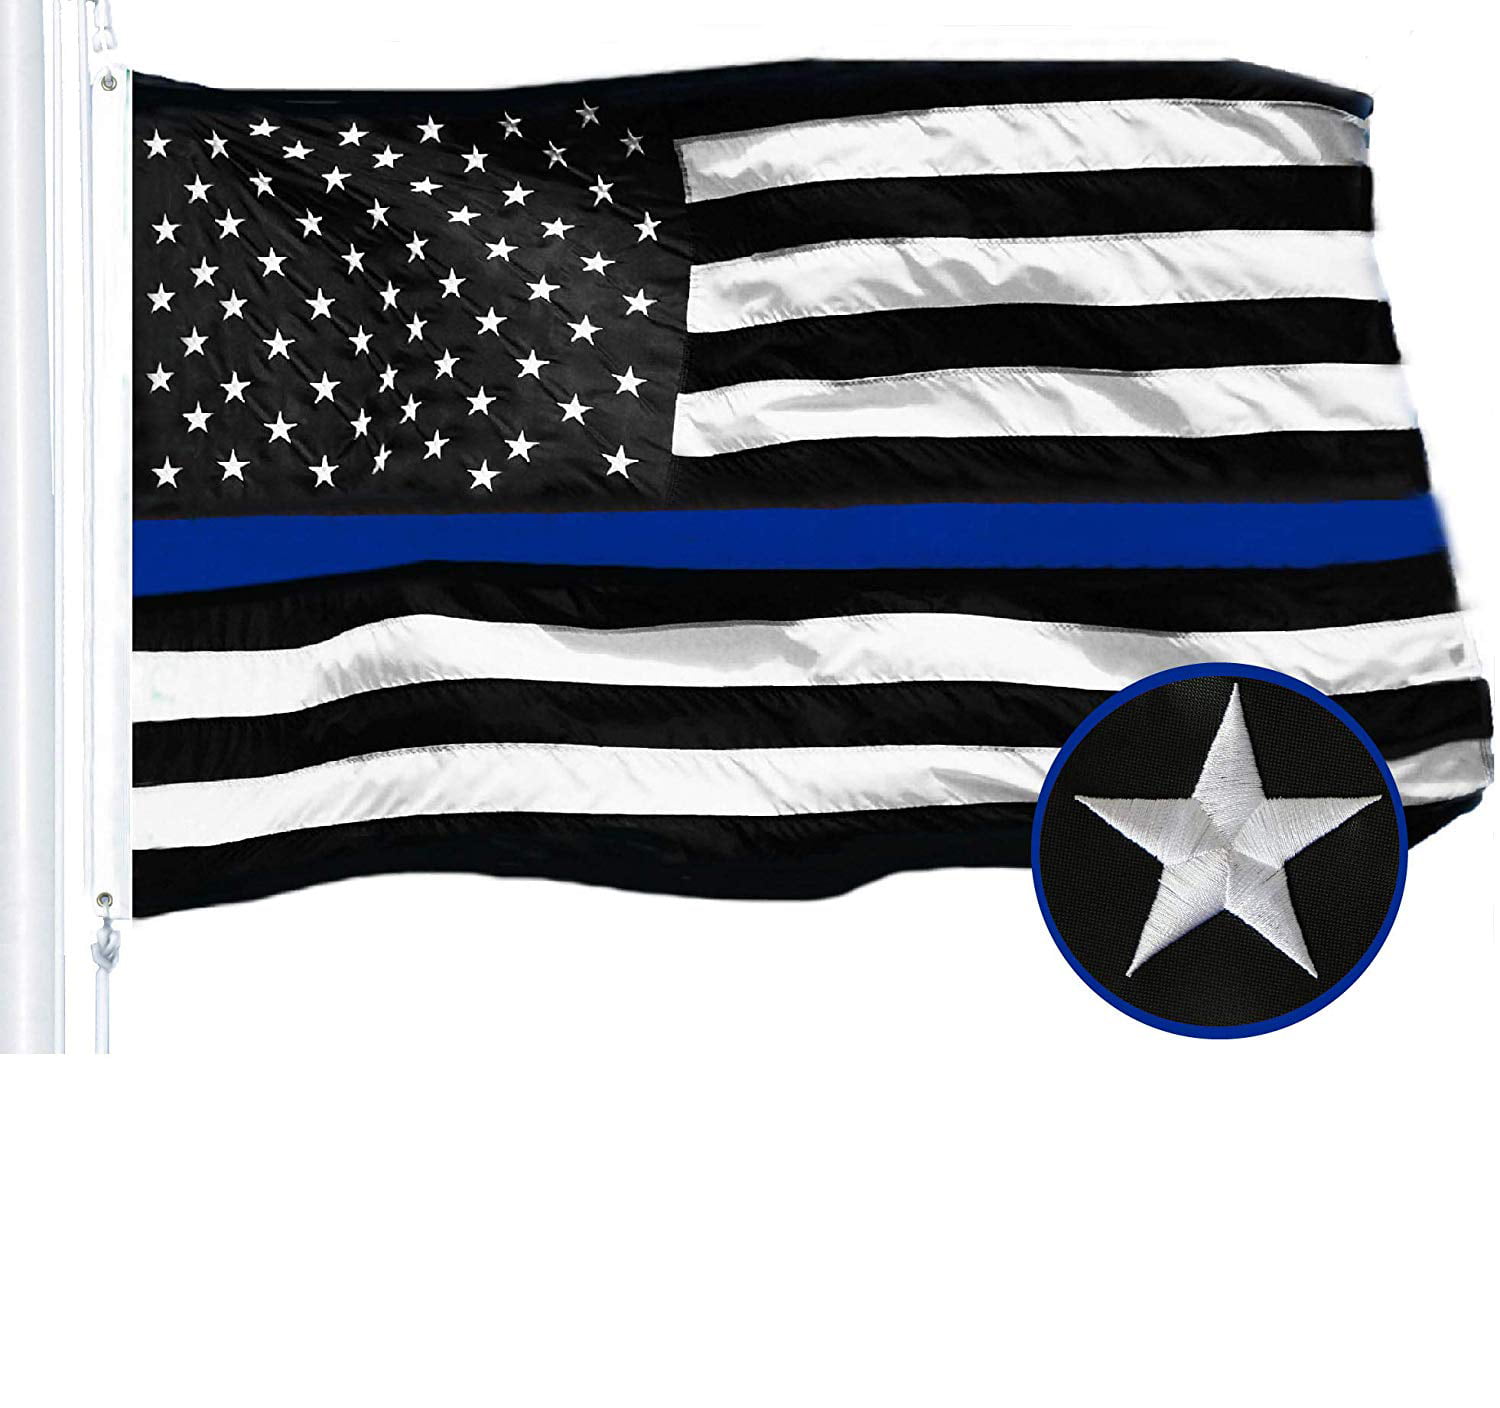 New Thin Blue Line Police Pride 3x5 Polyester Flag w/ Grommets 